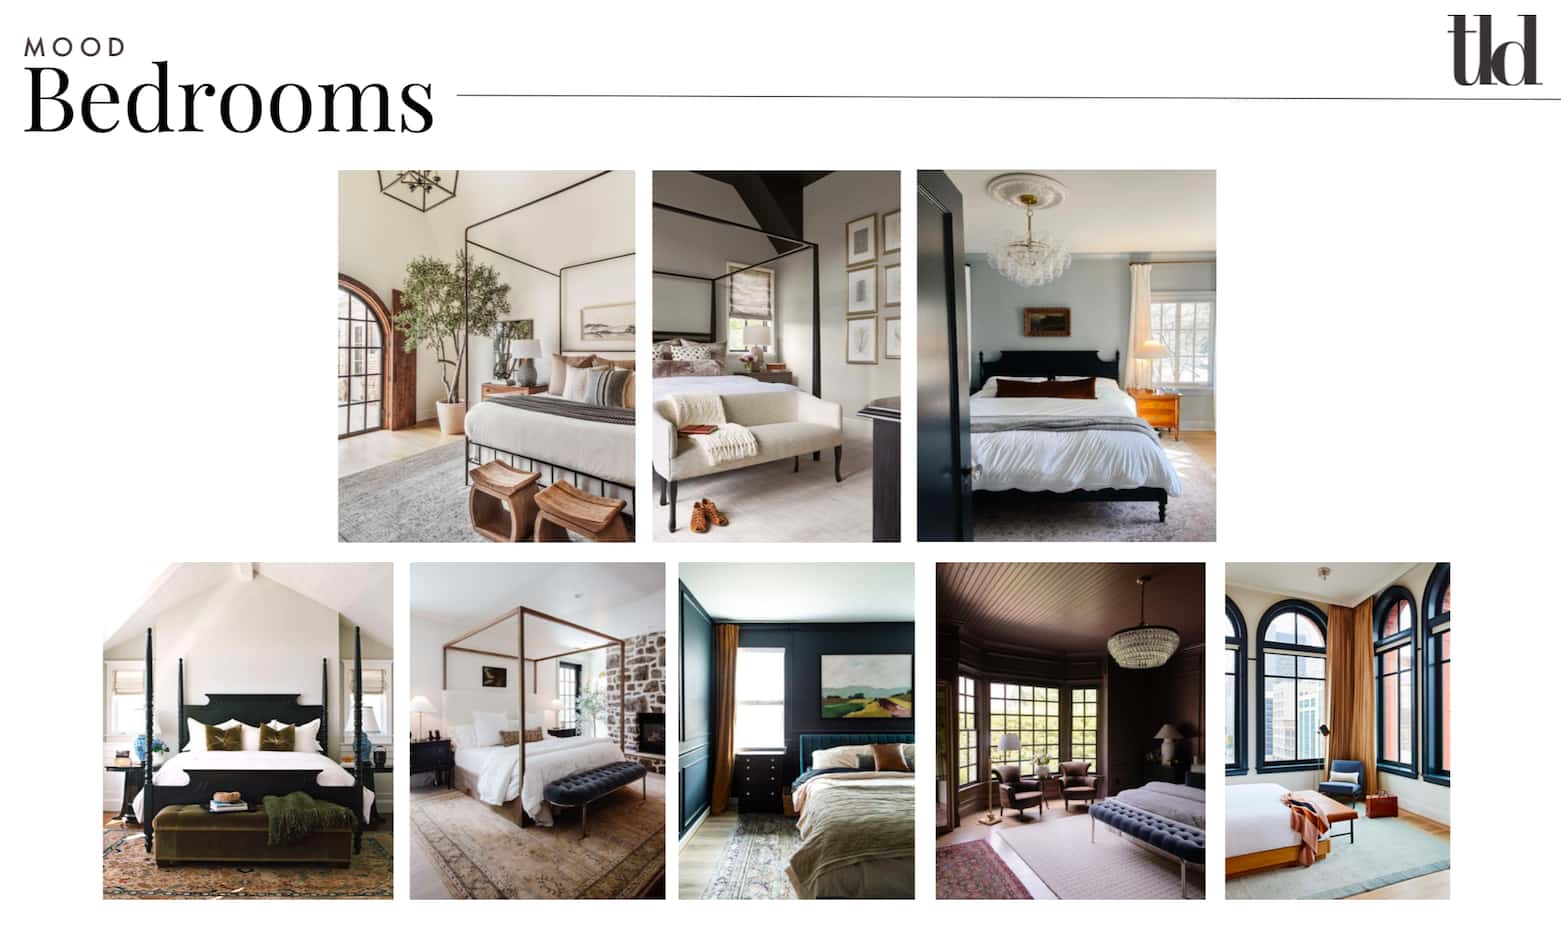 Mood board showing bedrooms with cozy, warm elements, as well as moody colors, bold...